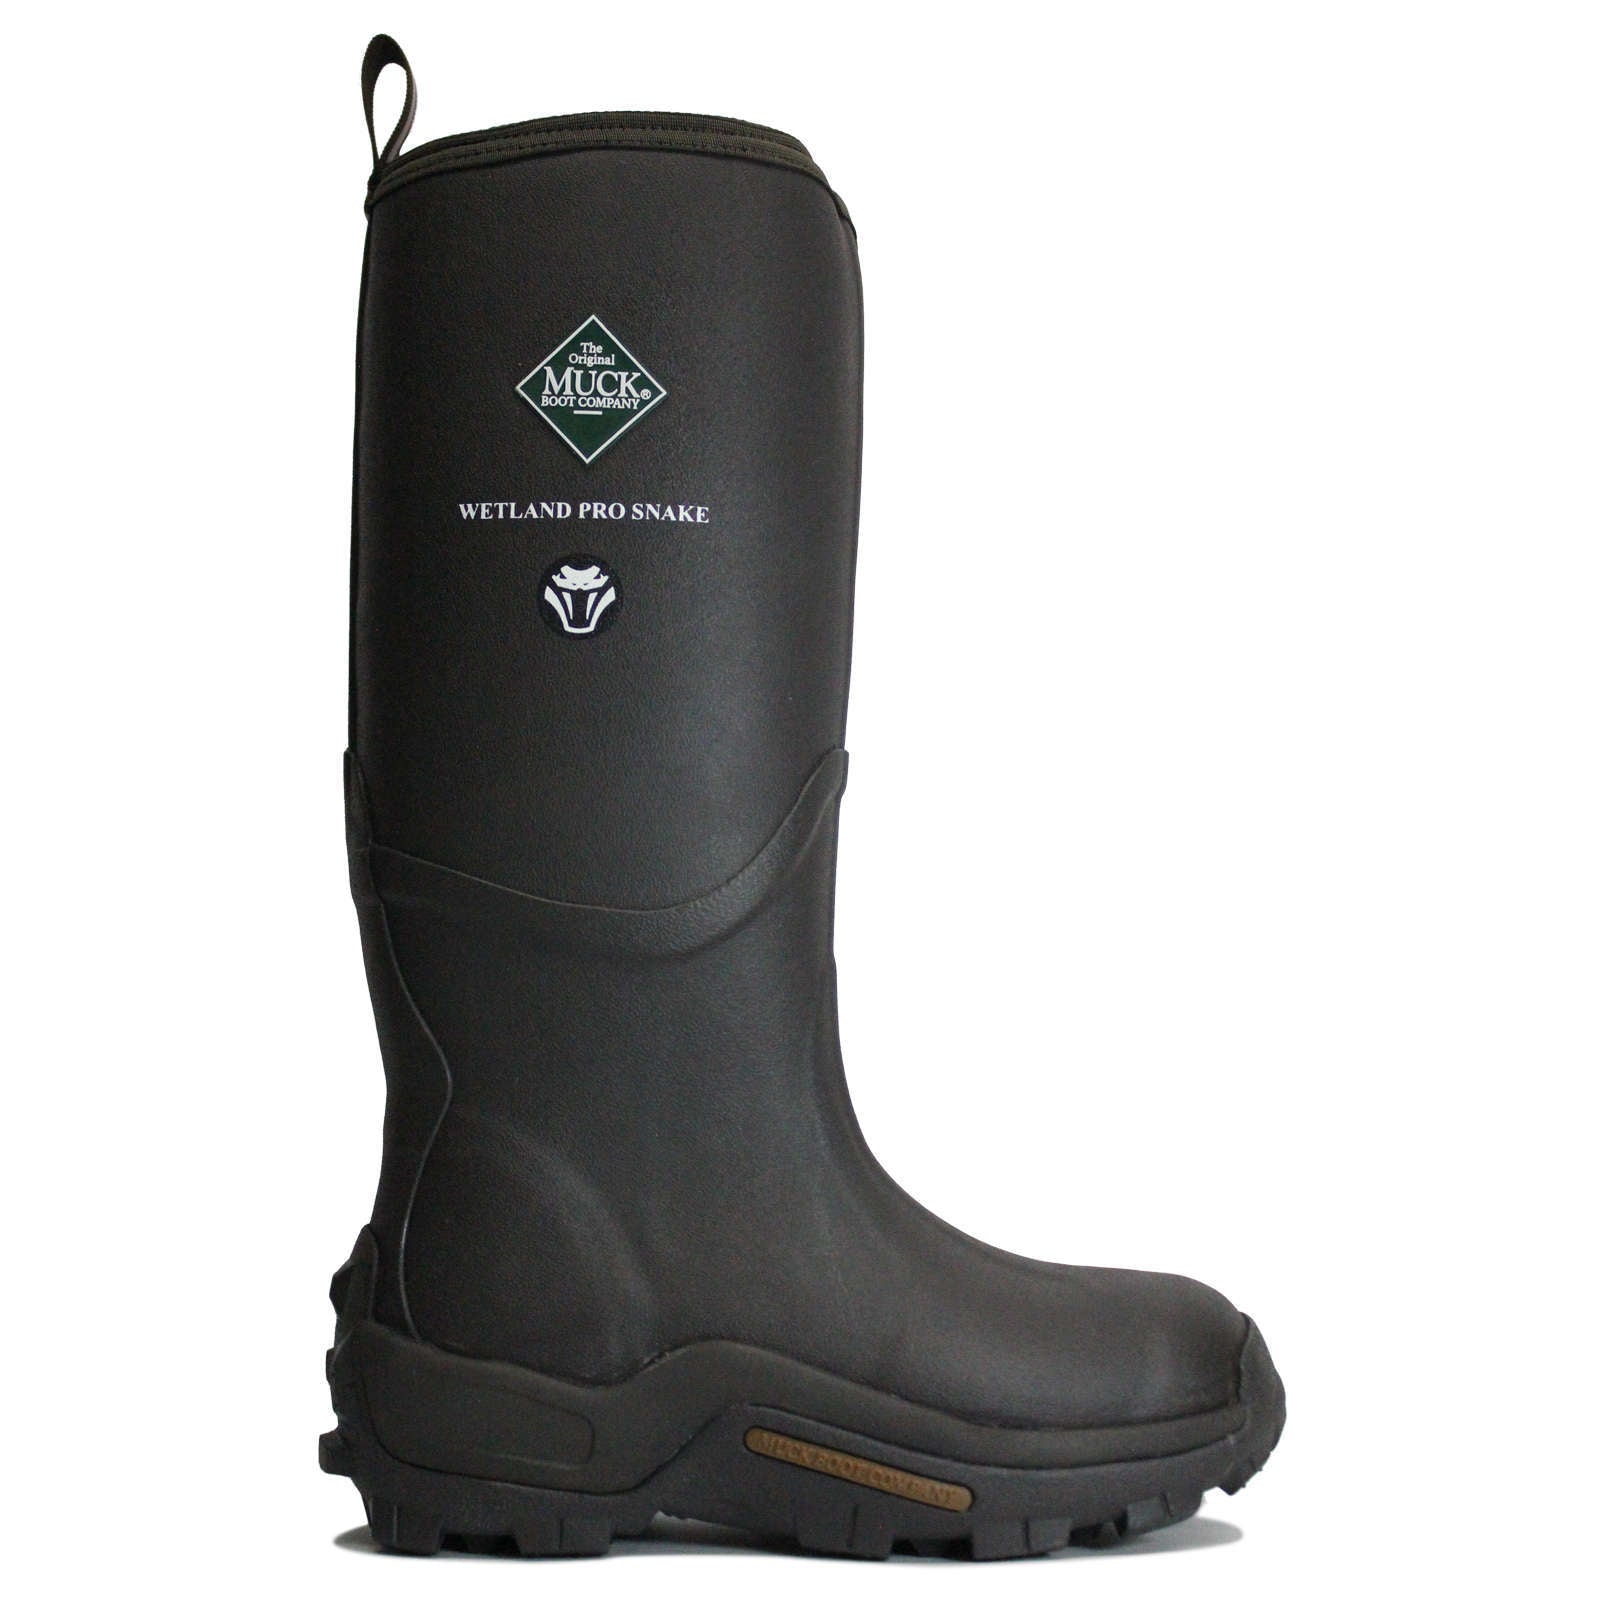 Muck Boot Wetland Pro Snake Waterproof Unisex Tall Wellington Boots#color_brown